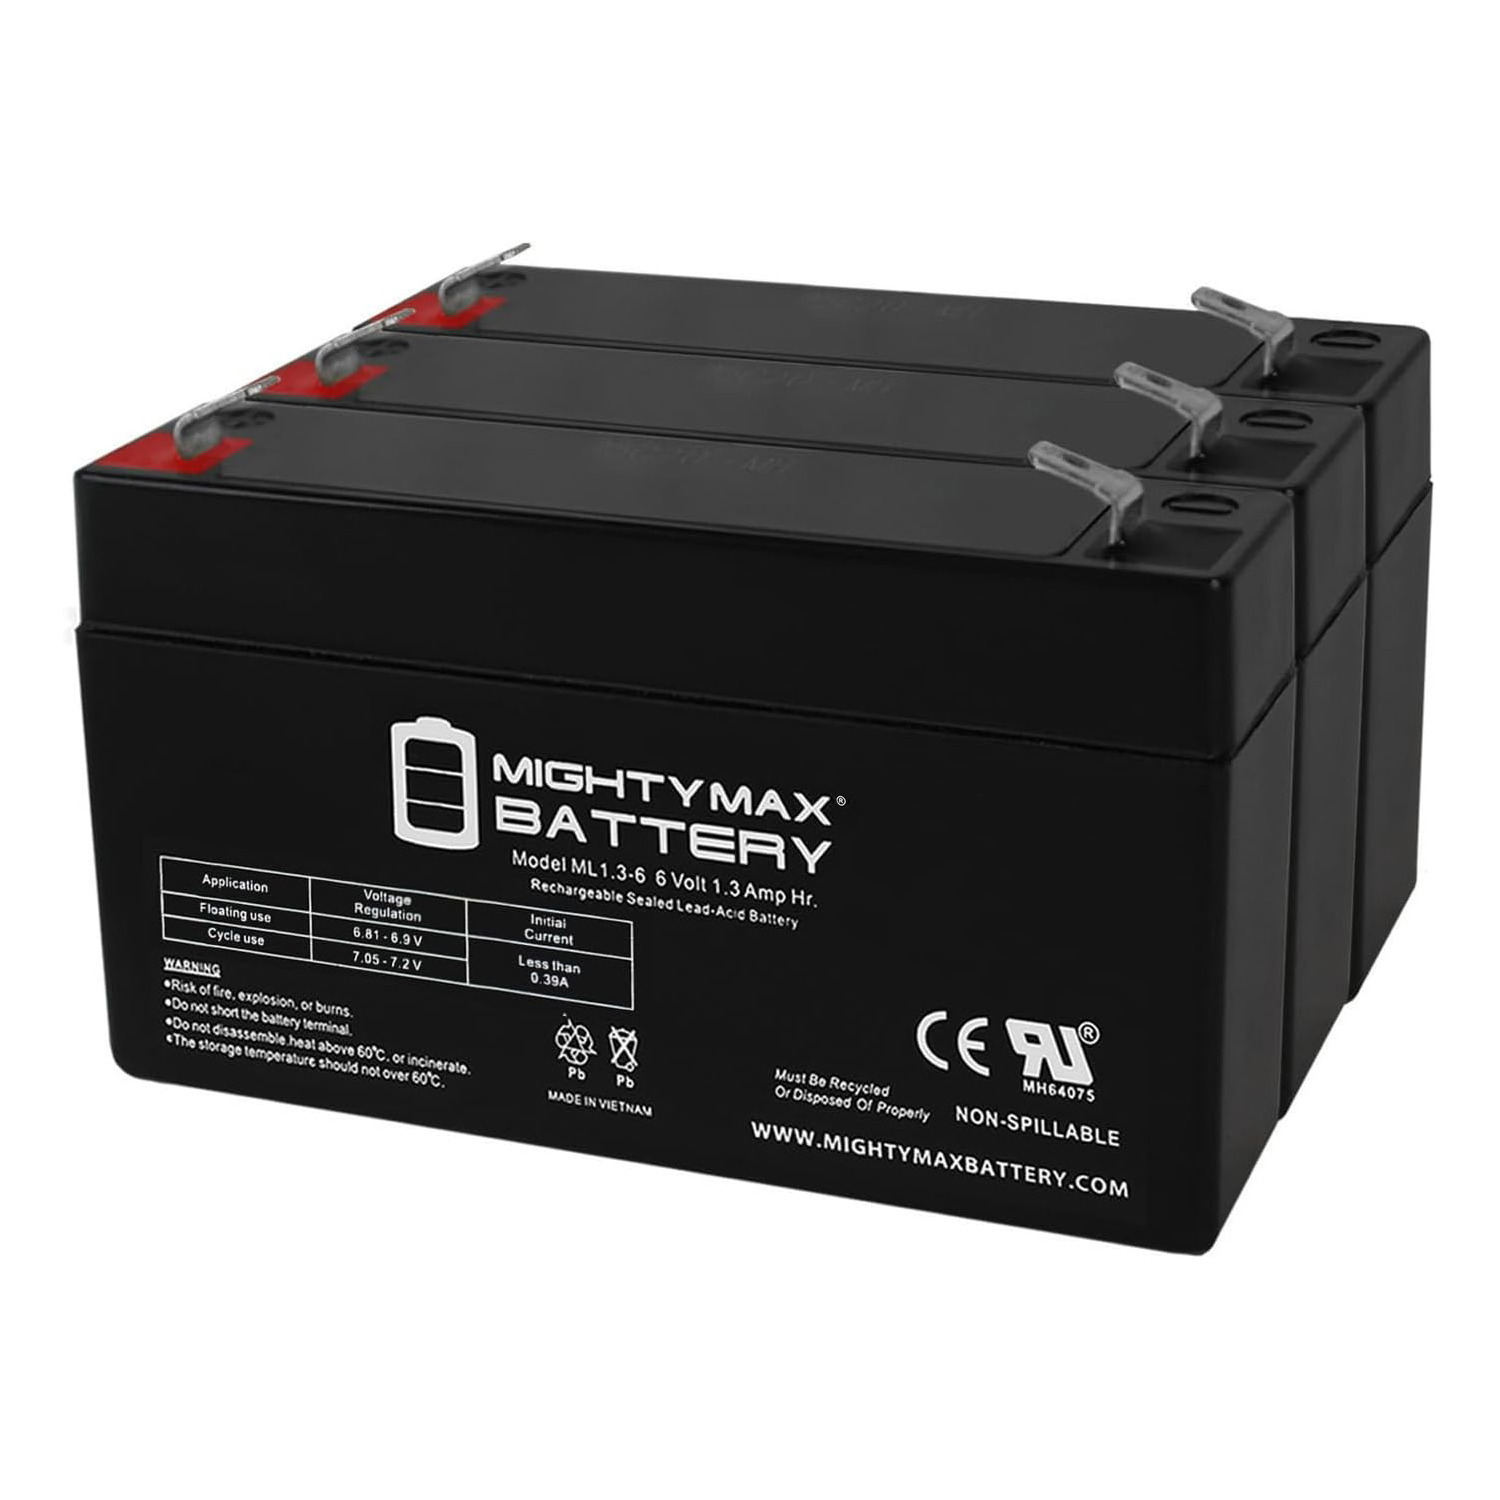 6V 1.3Ah Protocol Systems 240 Monitor Medical Battery - 3 Pack